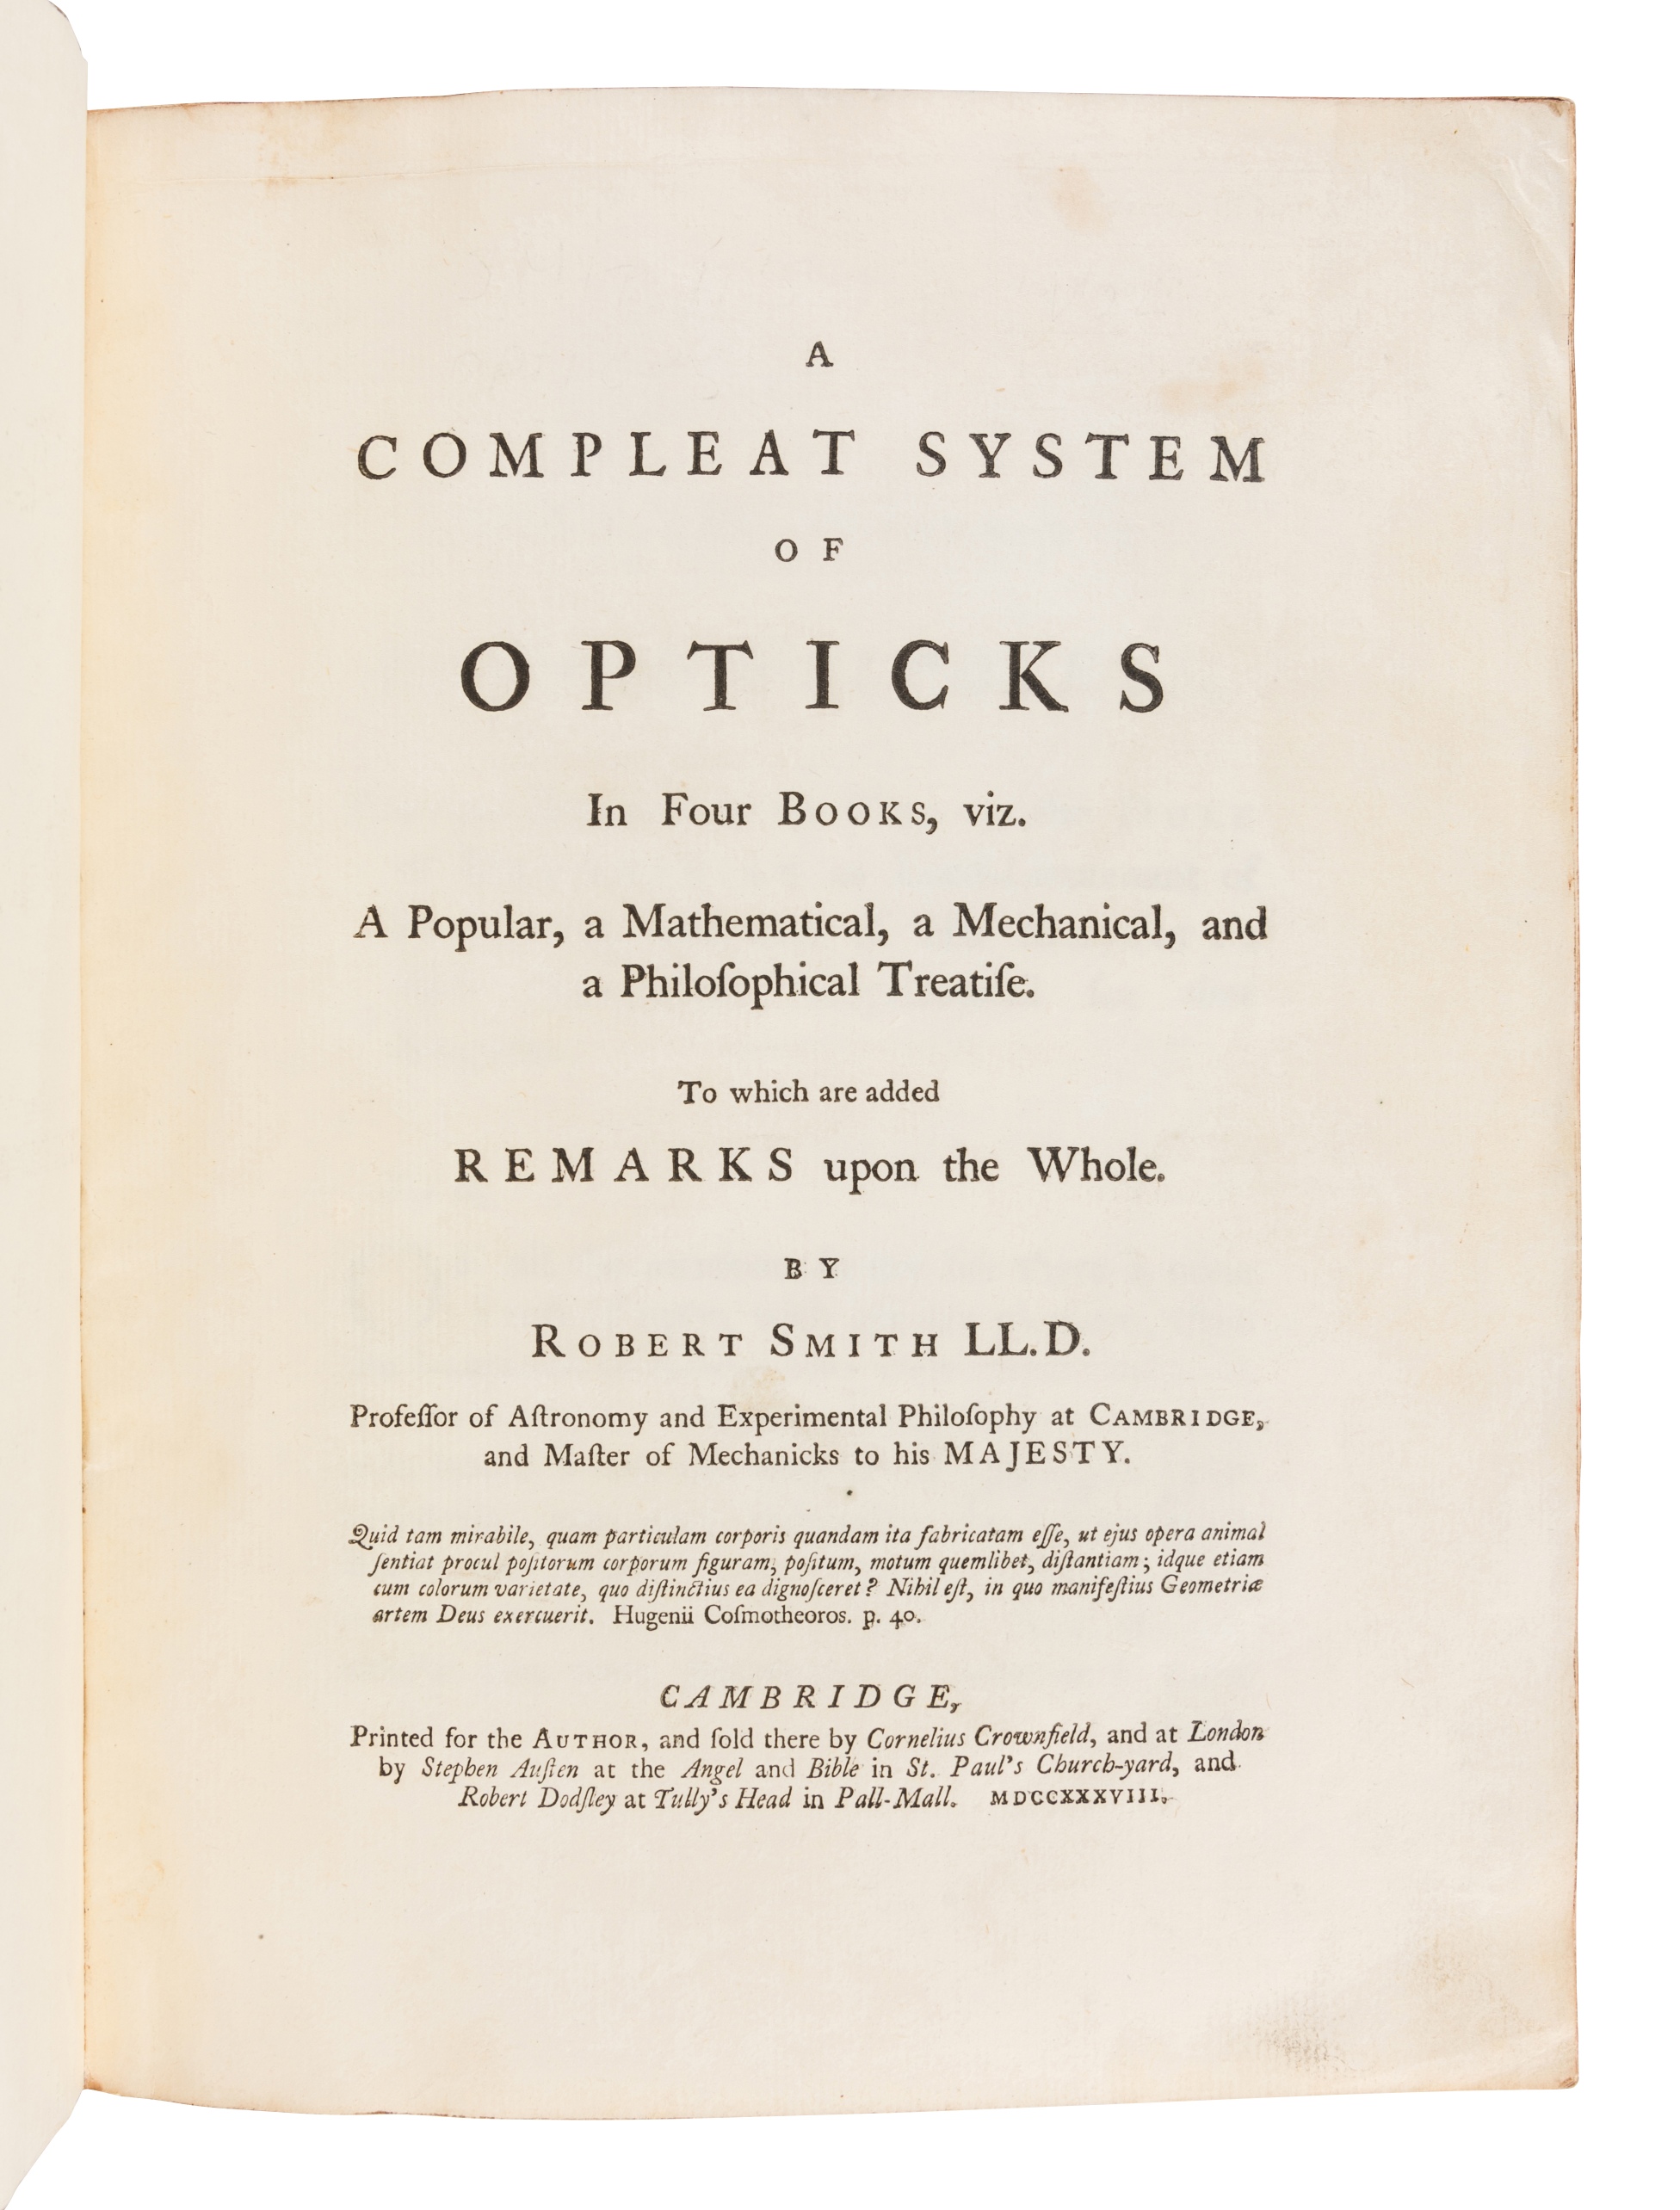 SMITH, Robert (1689-1768). A Compleat System of Opticks, in Four Books. Cambridge: for the Author, 1